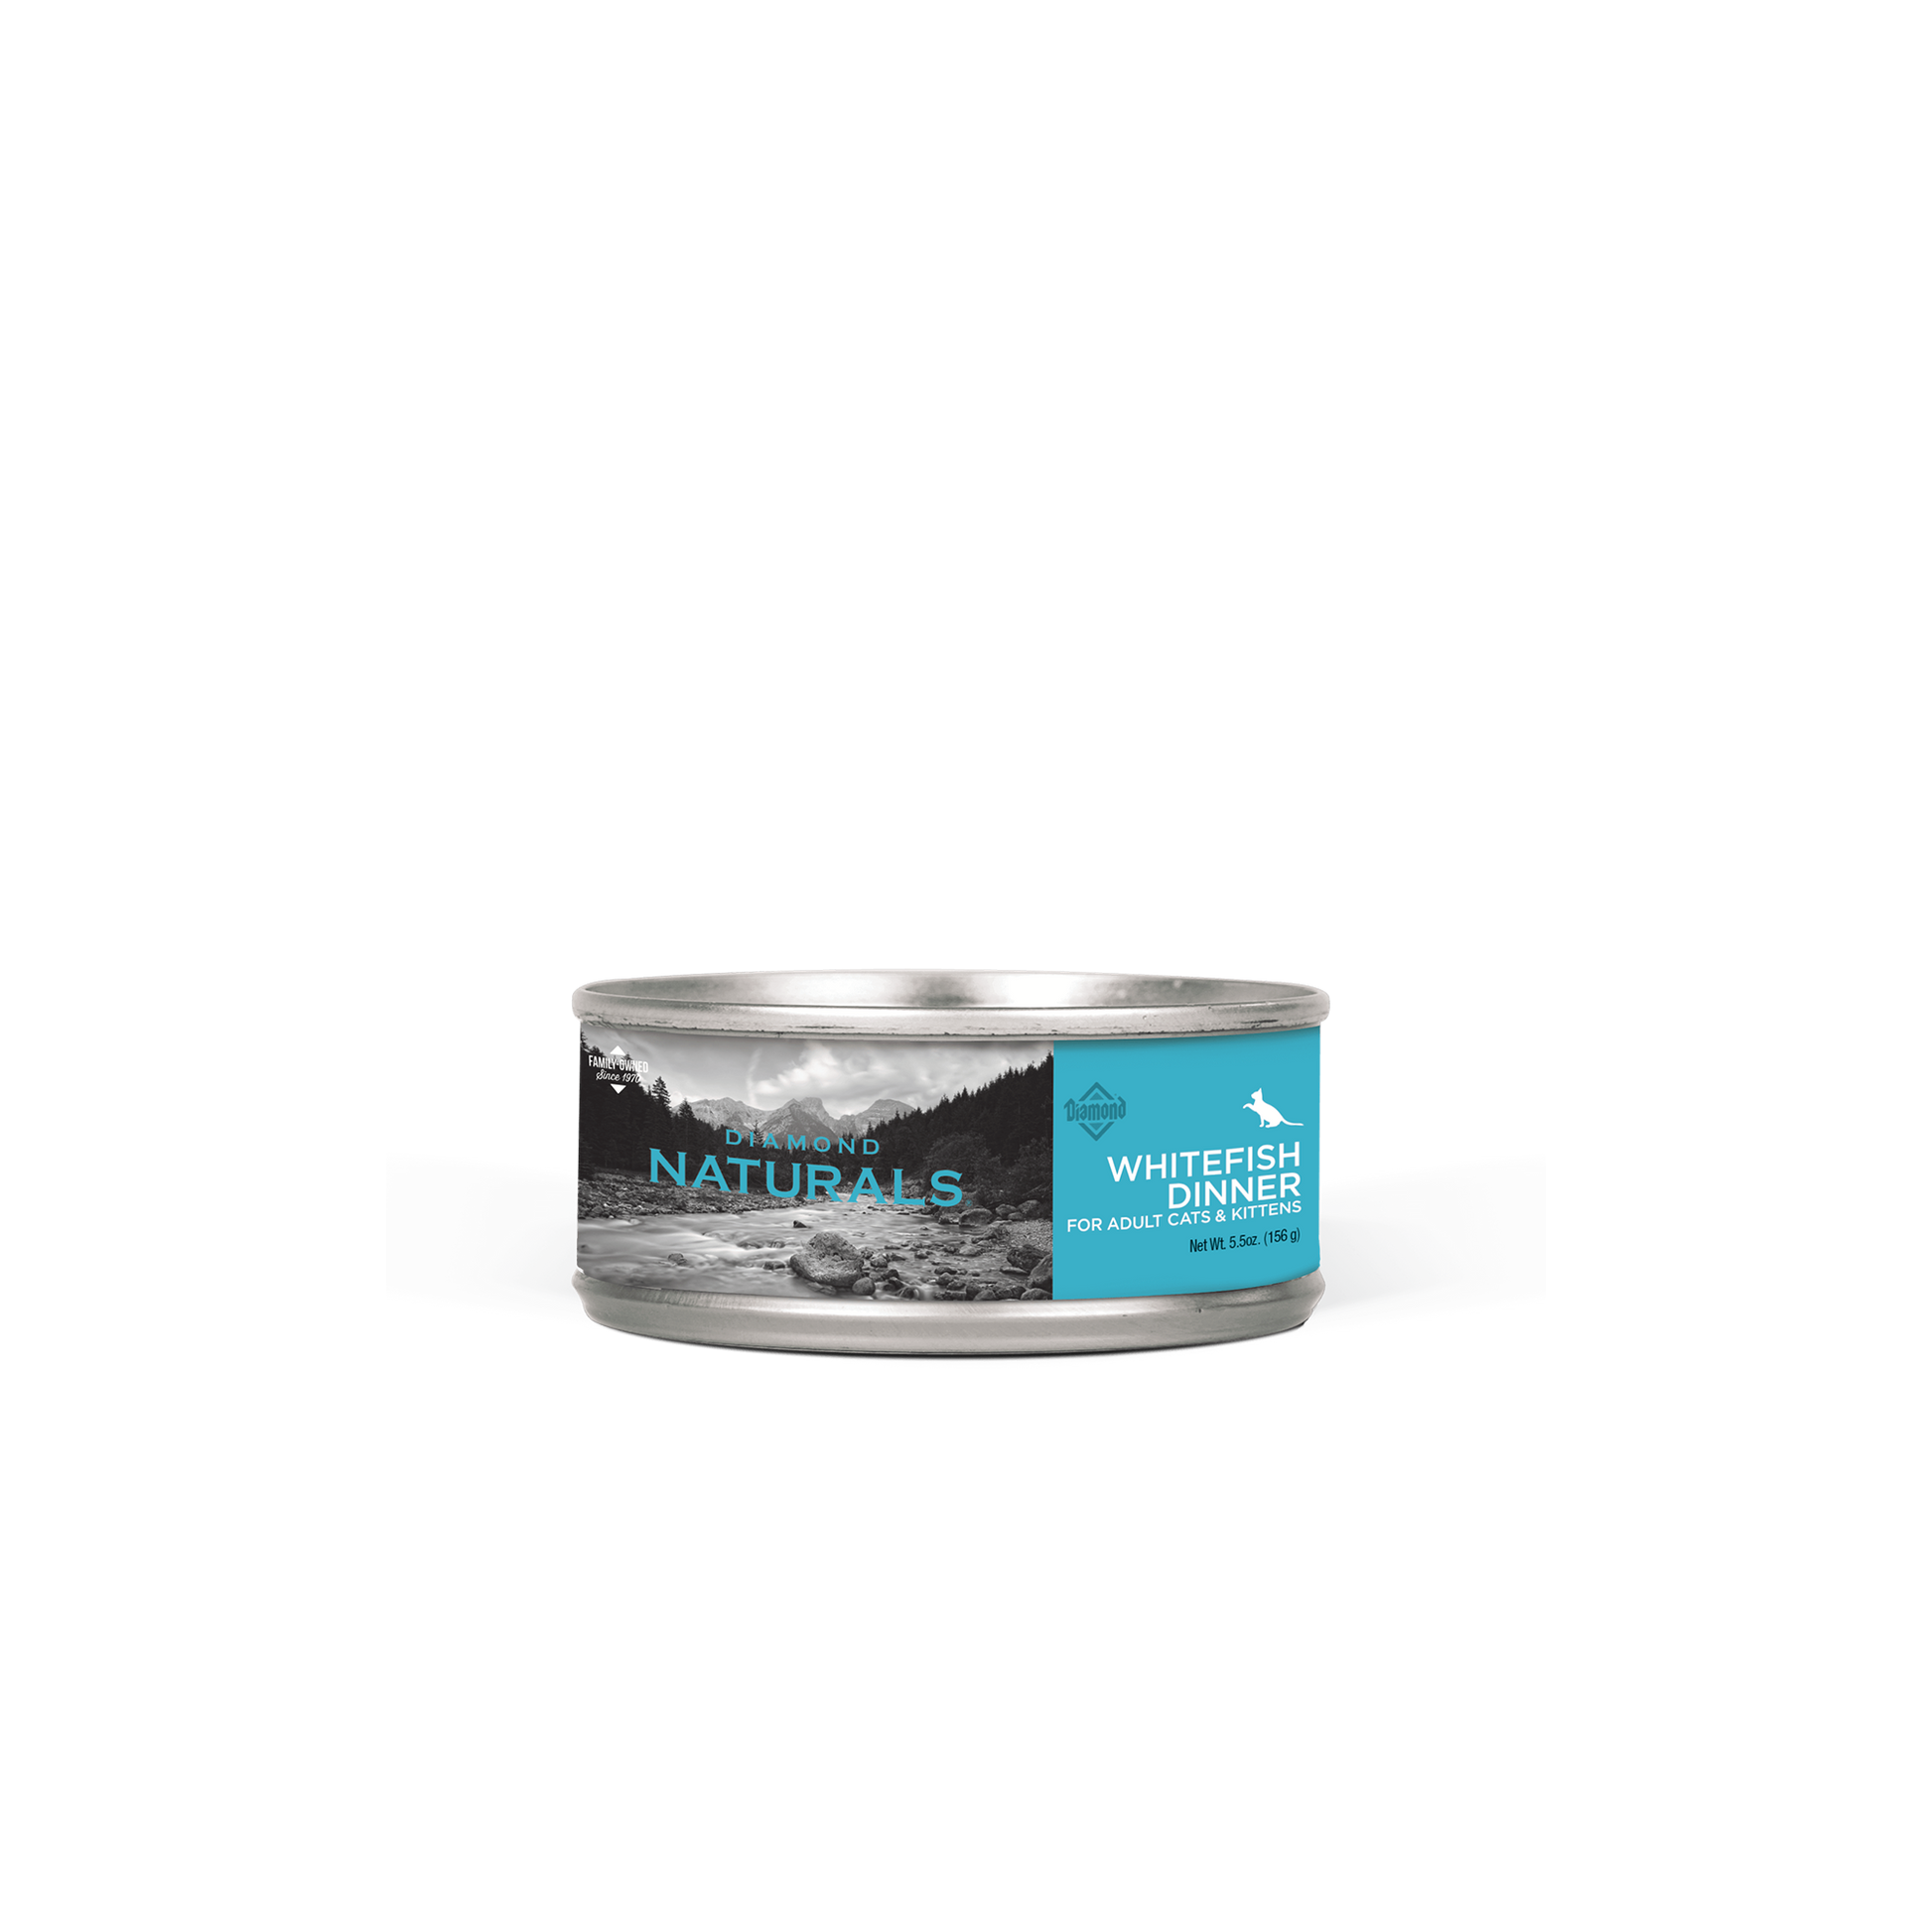 Diamond Naturals Whitefish Dinner Wet Food For Adult Cats and Kittens  Canned Cat Food  | PetMax Canada